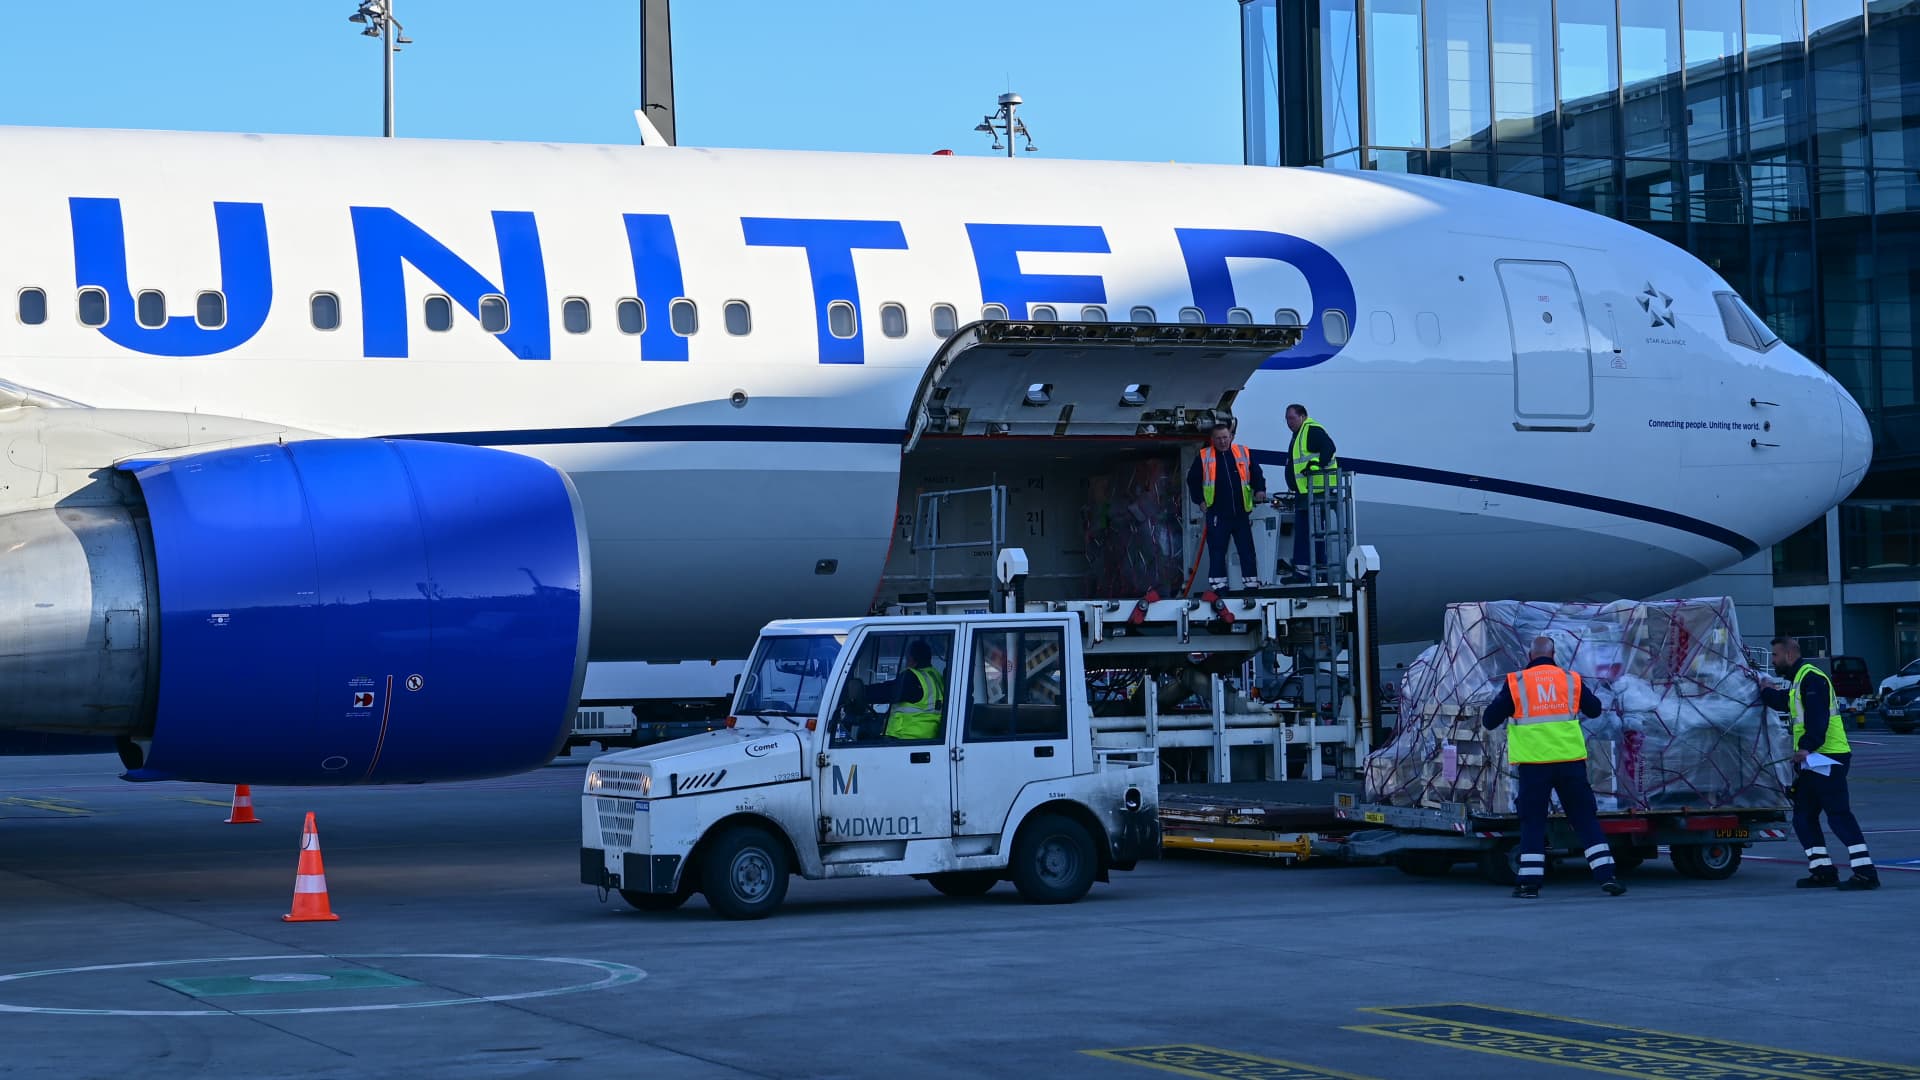 Stocks making the biggest moves after hours: United Airlines, Take-Two Interactive & more